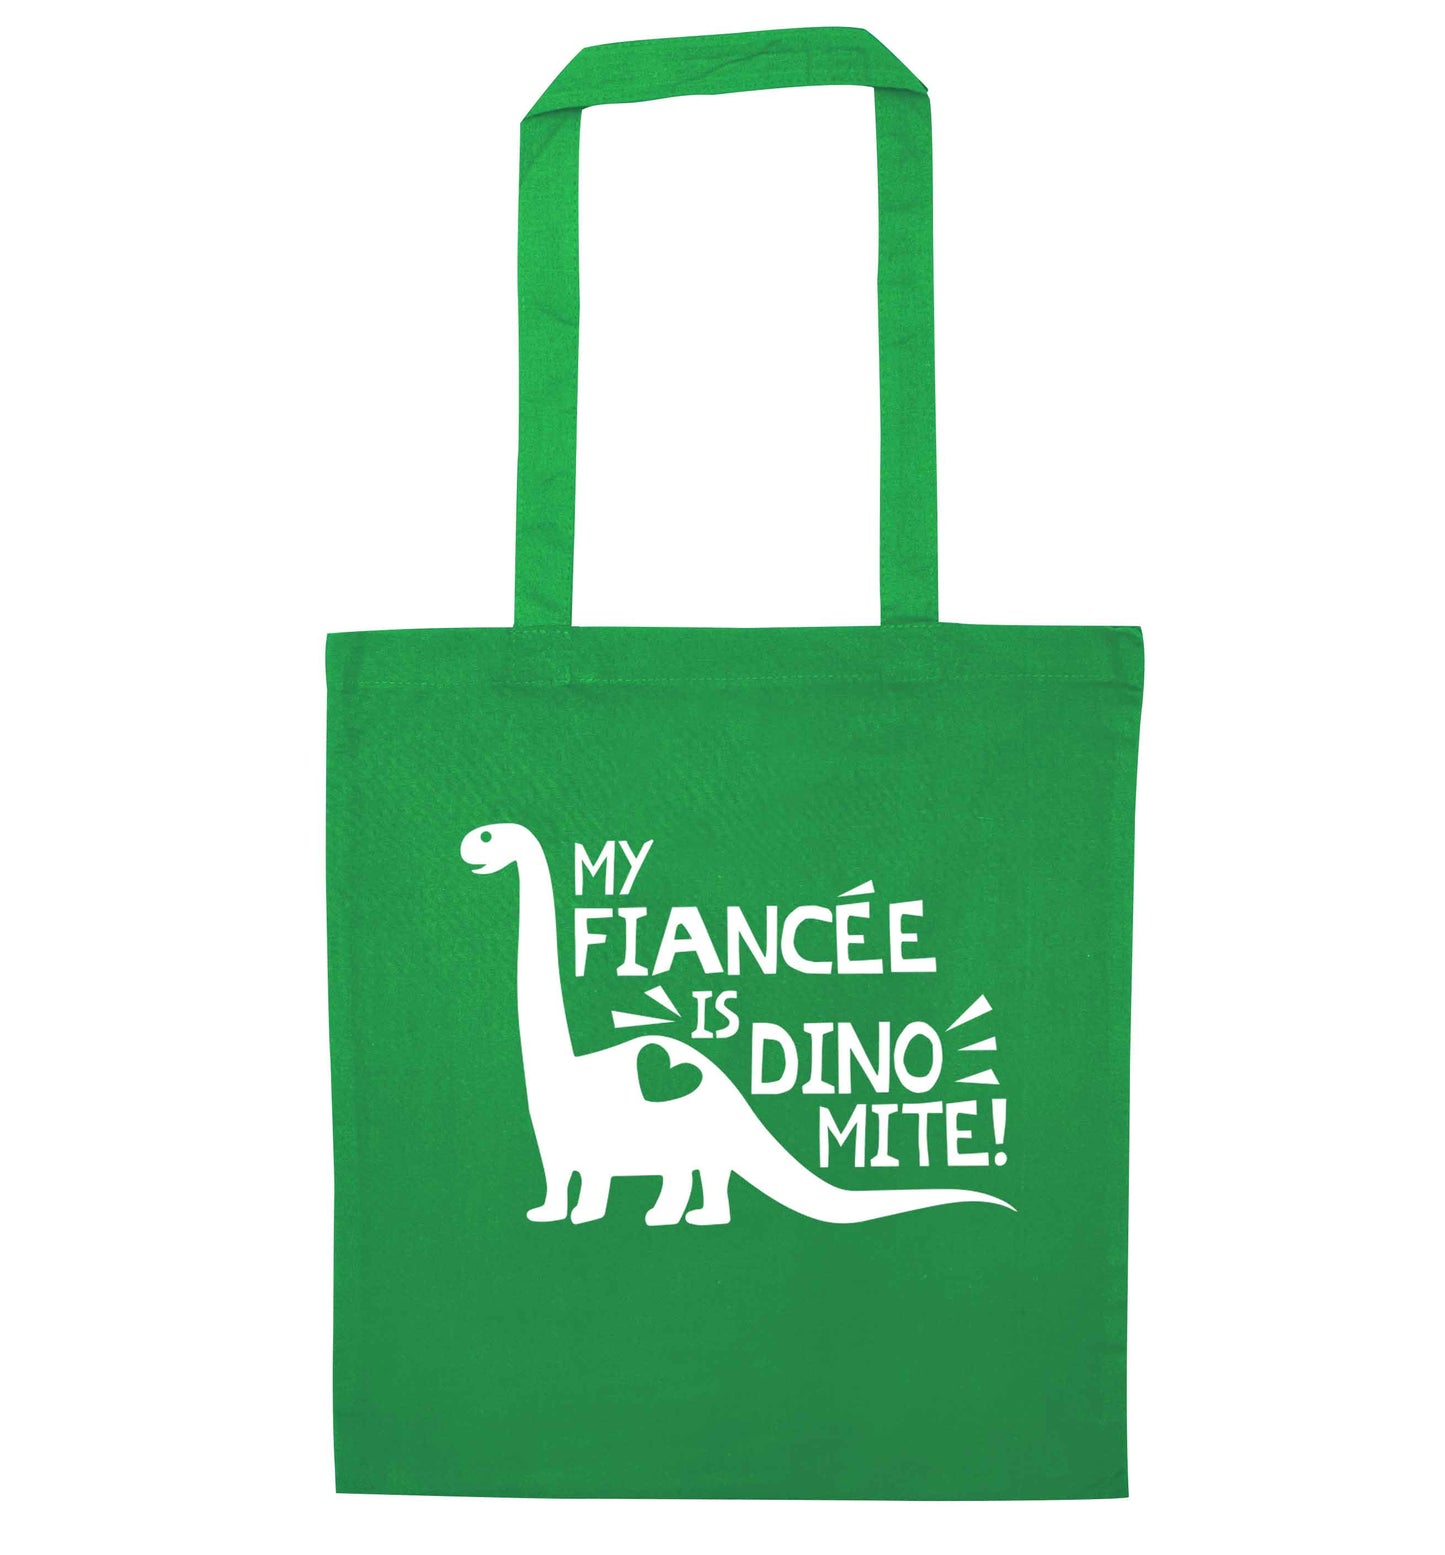 My fiancee is dinomite! green tote bag